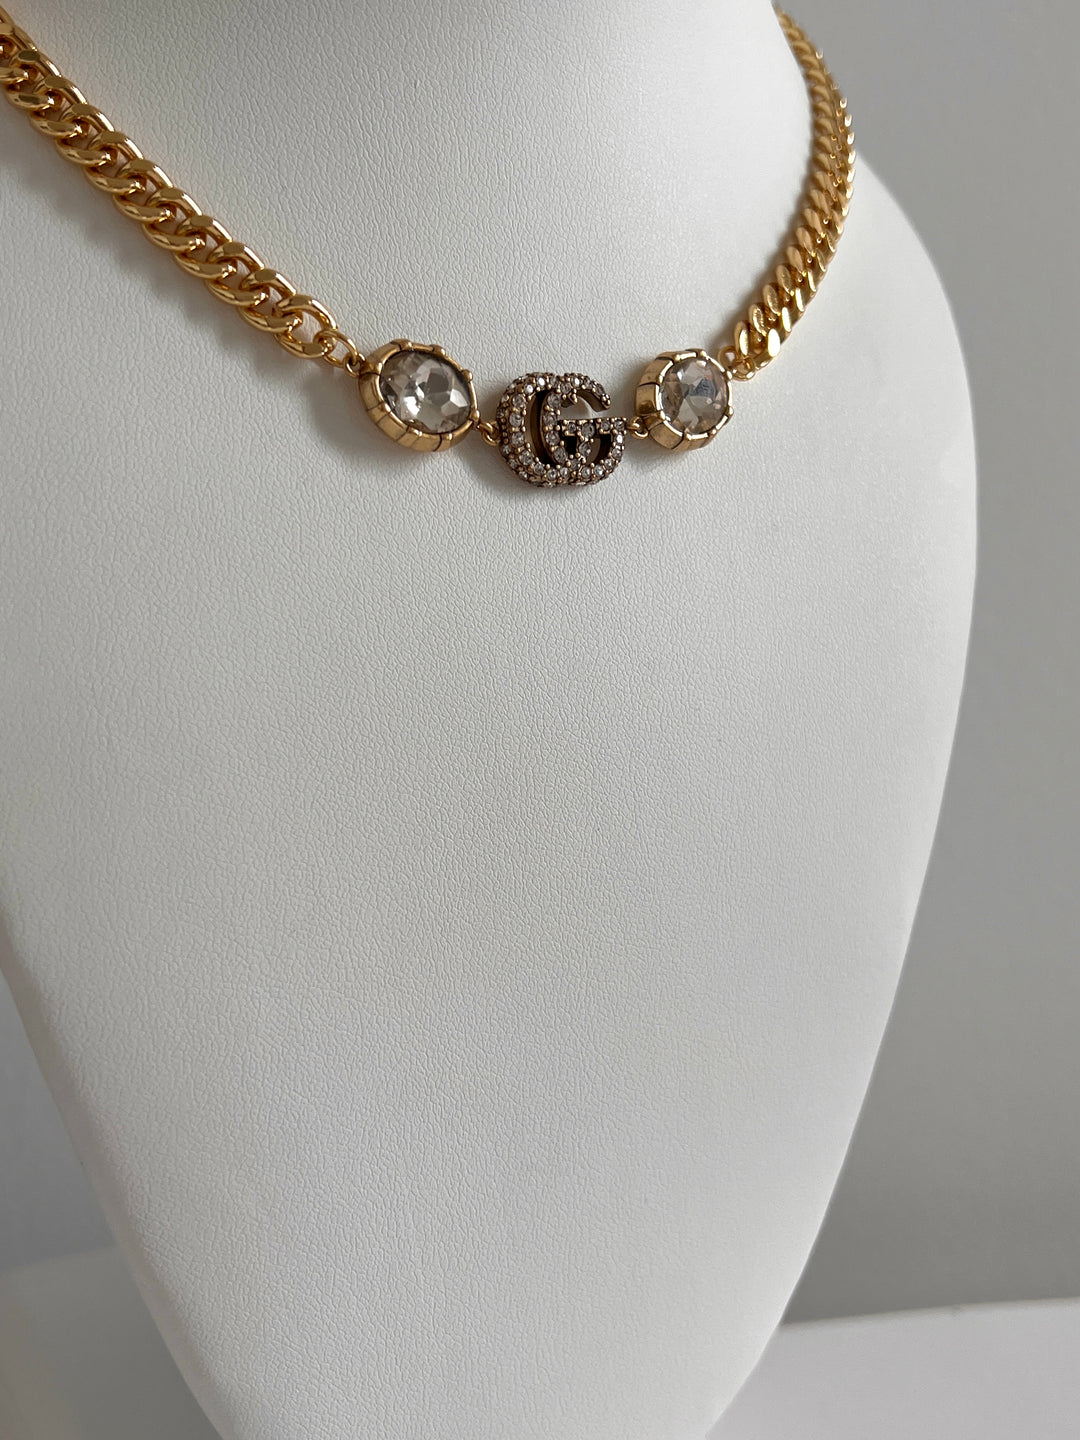 GG with Crystal Accent Necklace | REWORKED